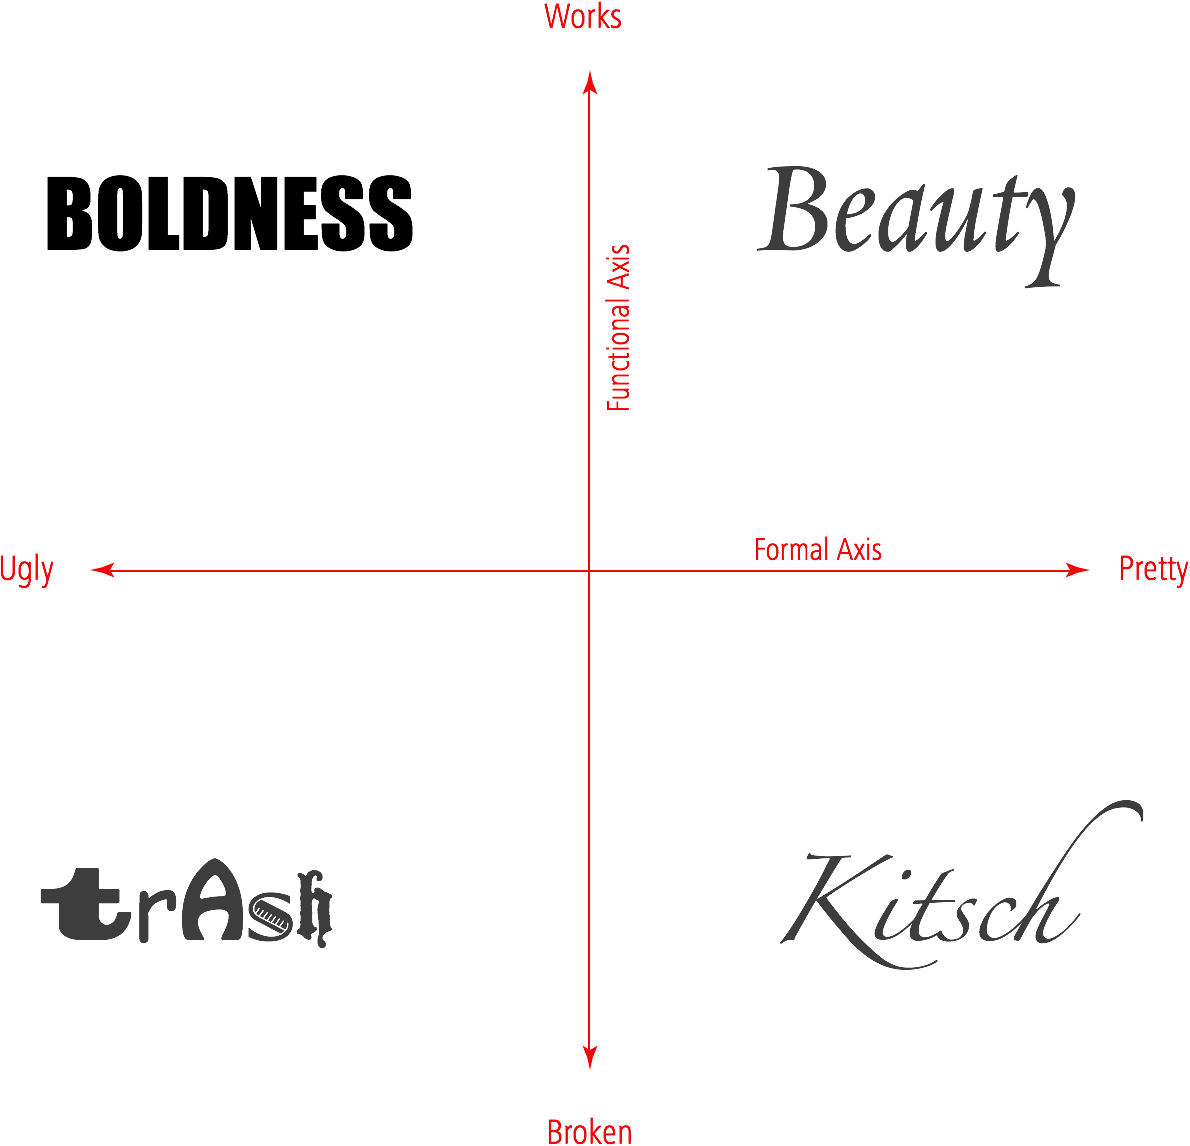 The previous graph, with the terms ‘Beauty’, ‘Boldness’, ‘Trash’, and ‘Kitsch’ applied to the quadrants, counter-clockwise from the top left quadrant.